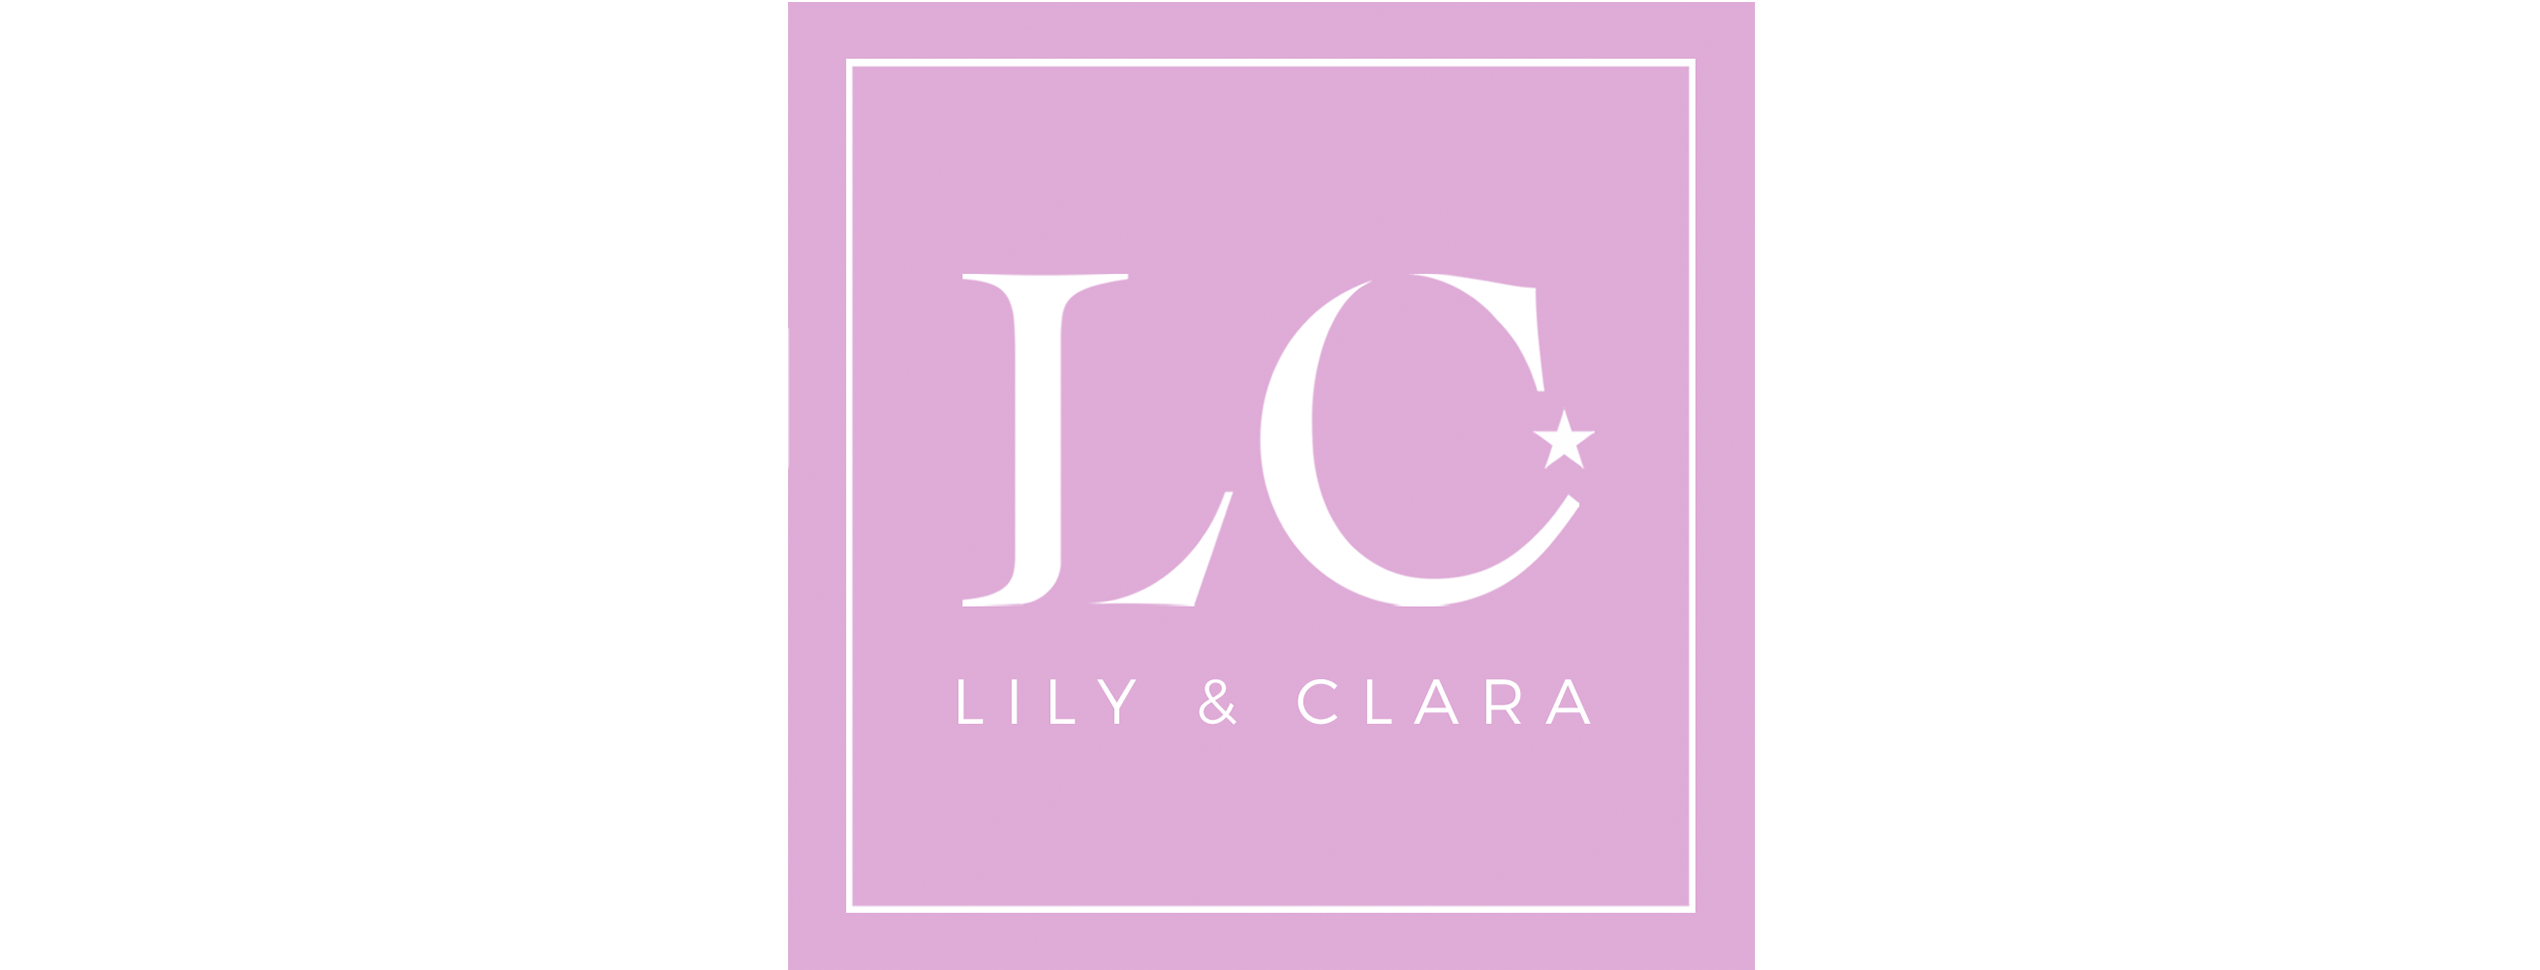 ABOUT US – Lily & Clara